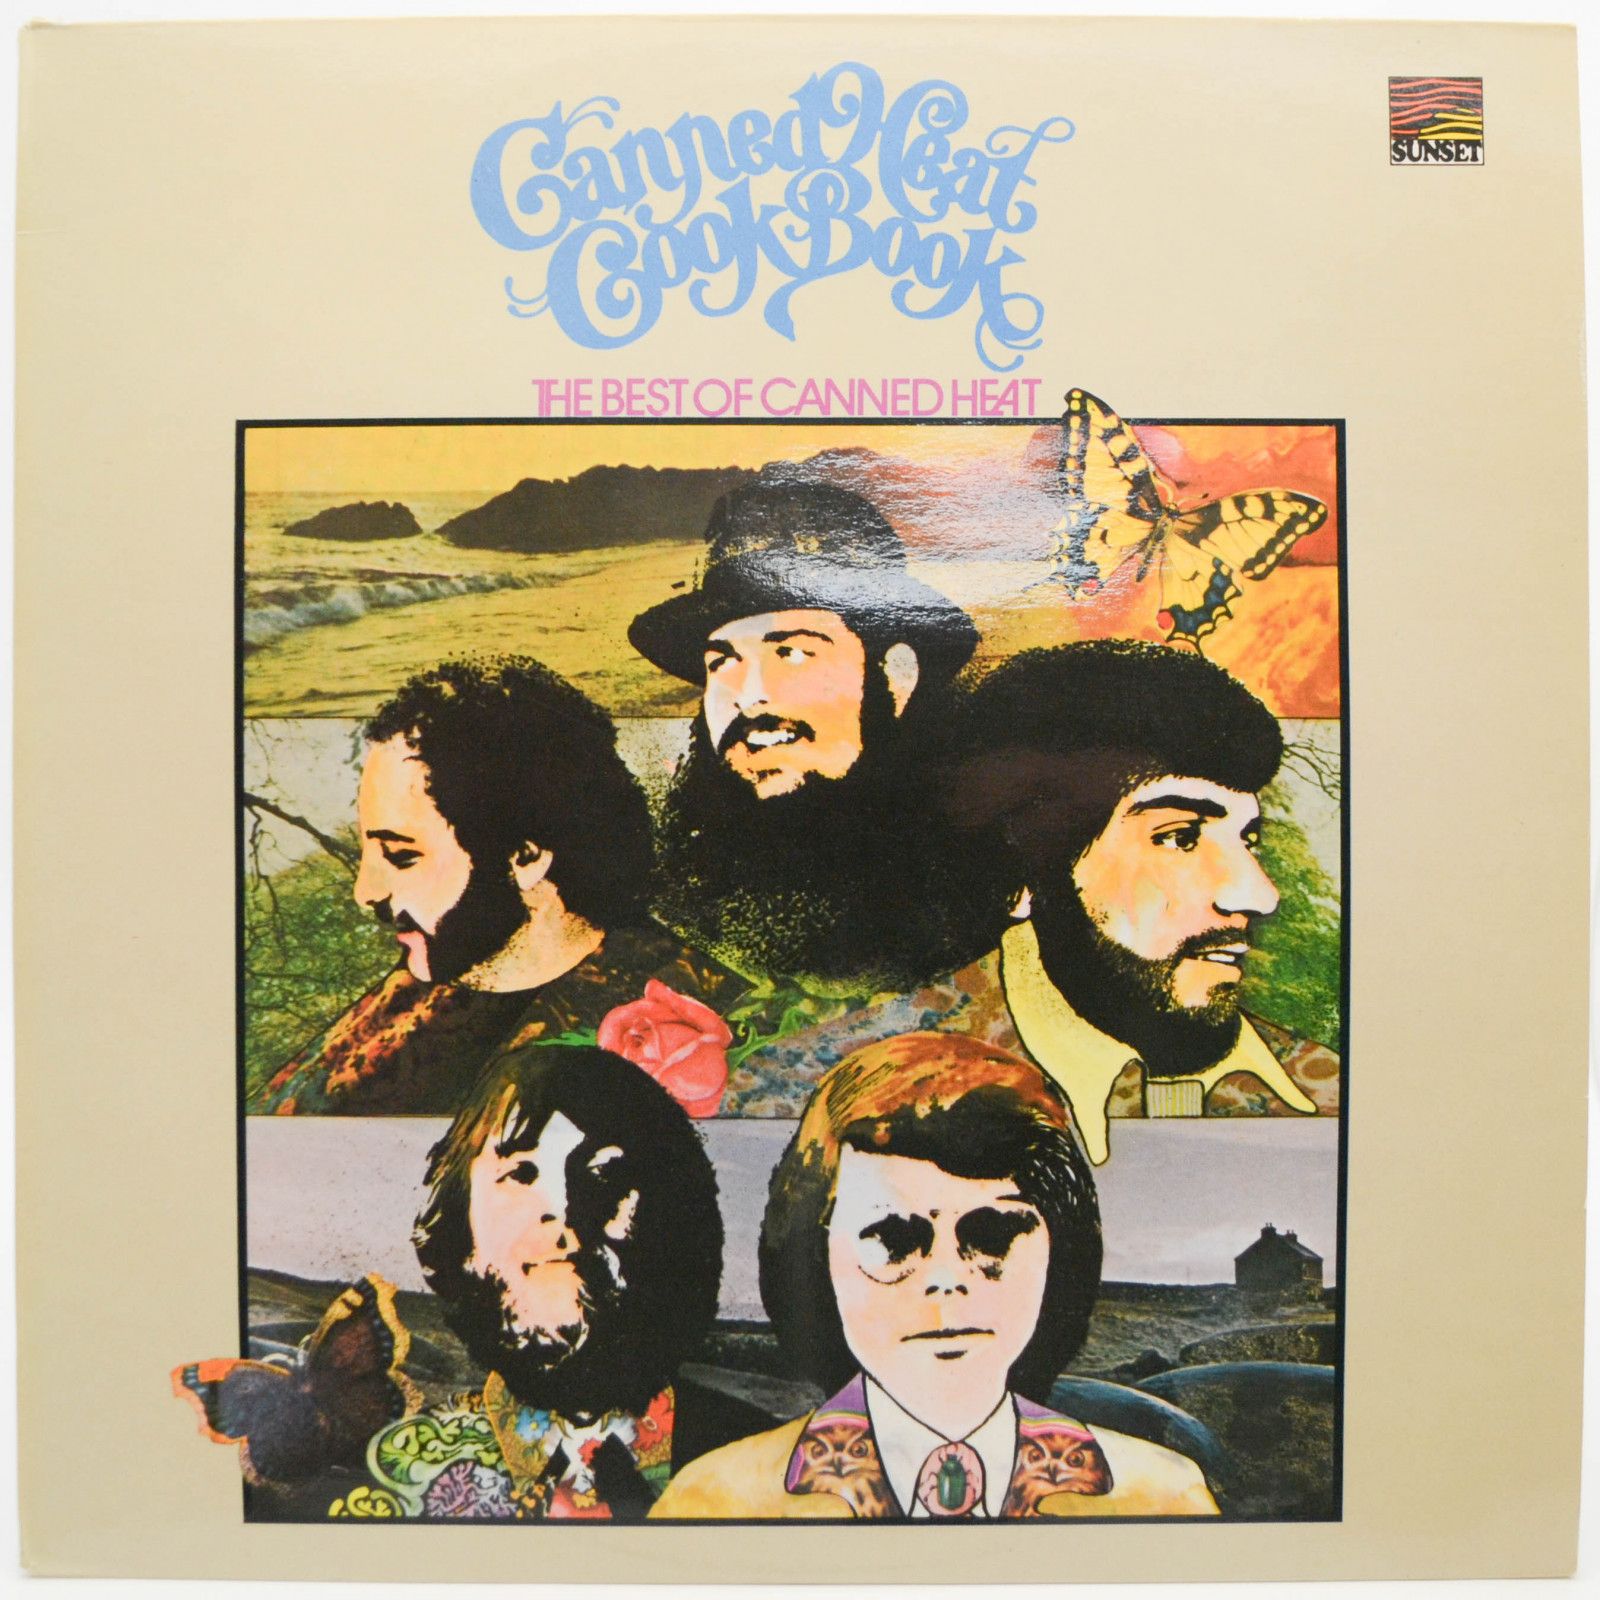 Canned Heat — The Canned Heat Cook Book (The Best Of Canned Heat) (UK), 1975